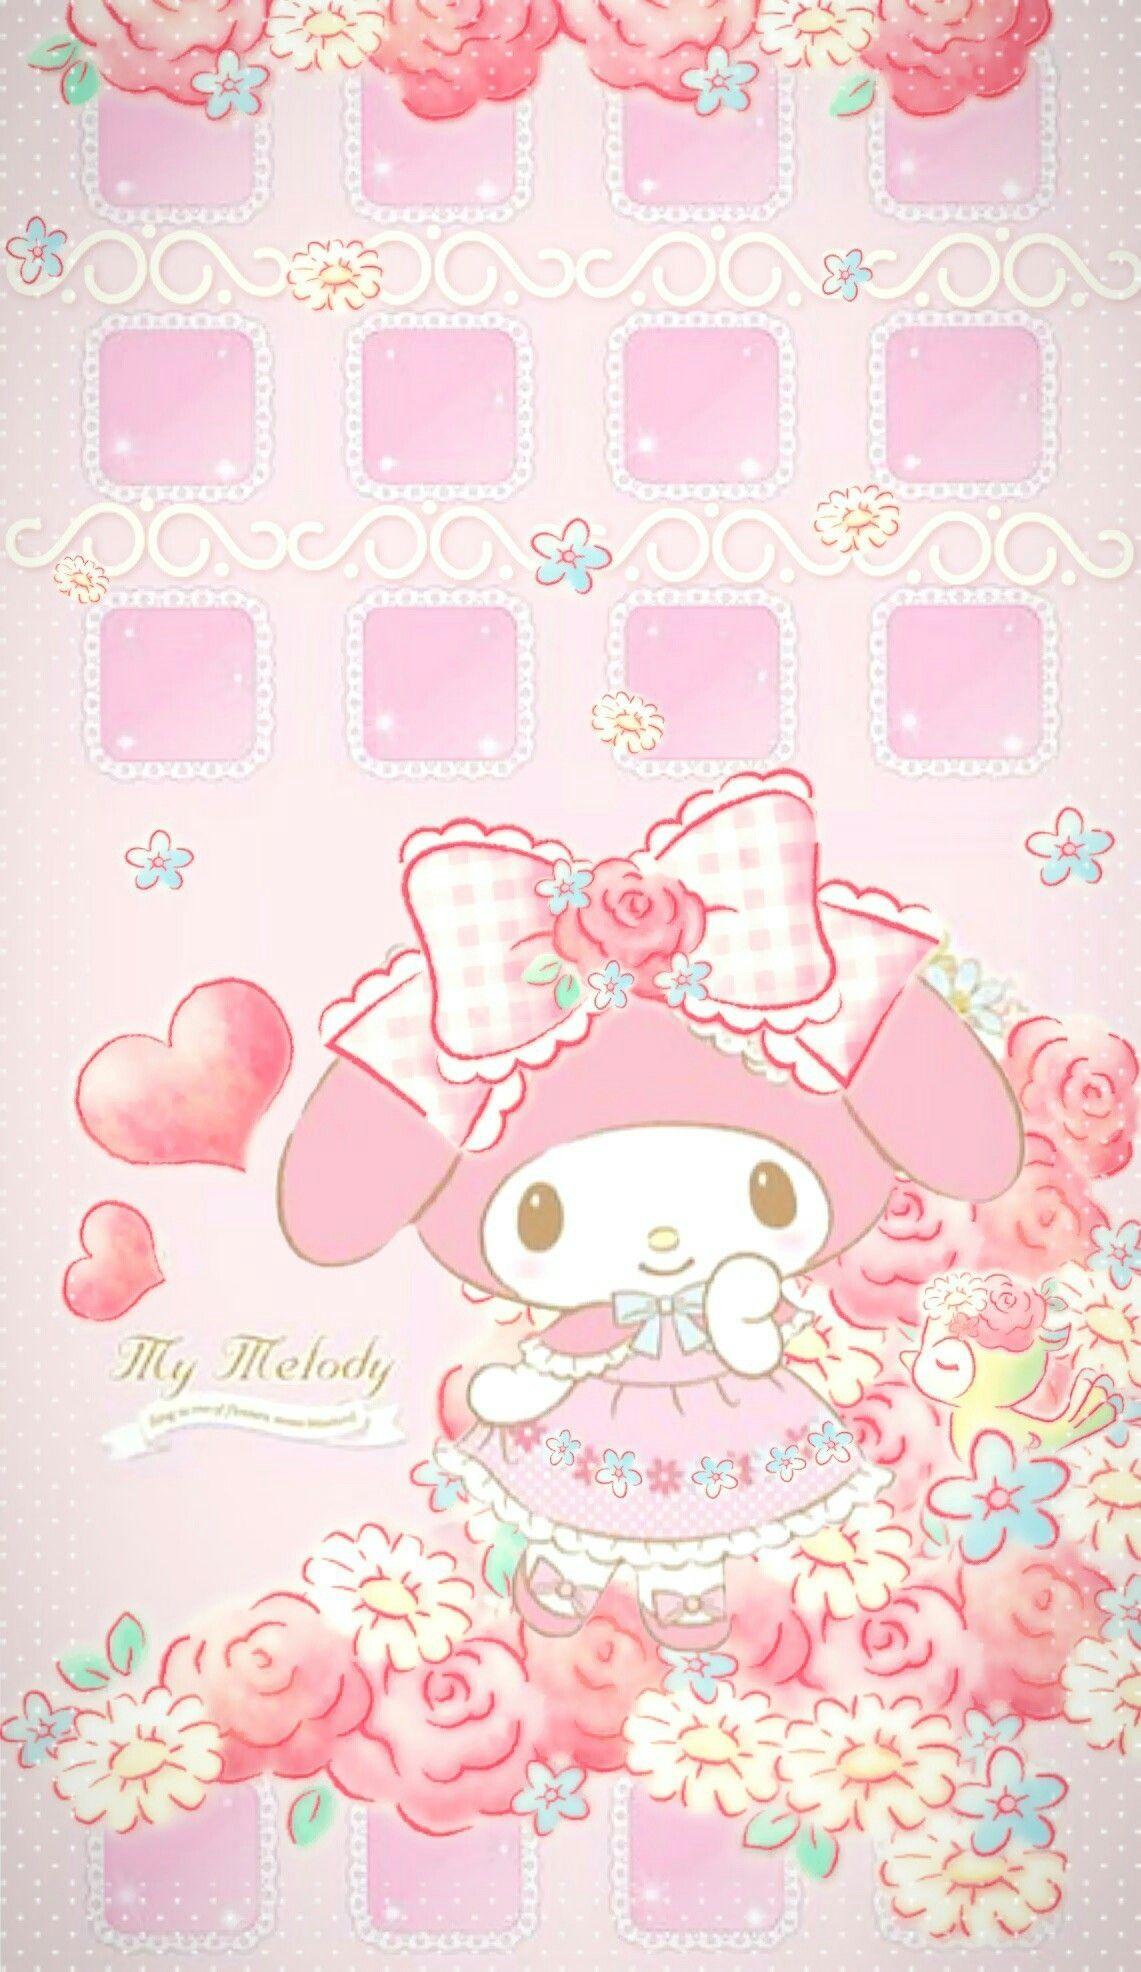  My  Melody  Wallpapers Top Free  My  Melody  Backgrounds  